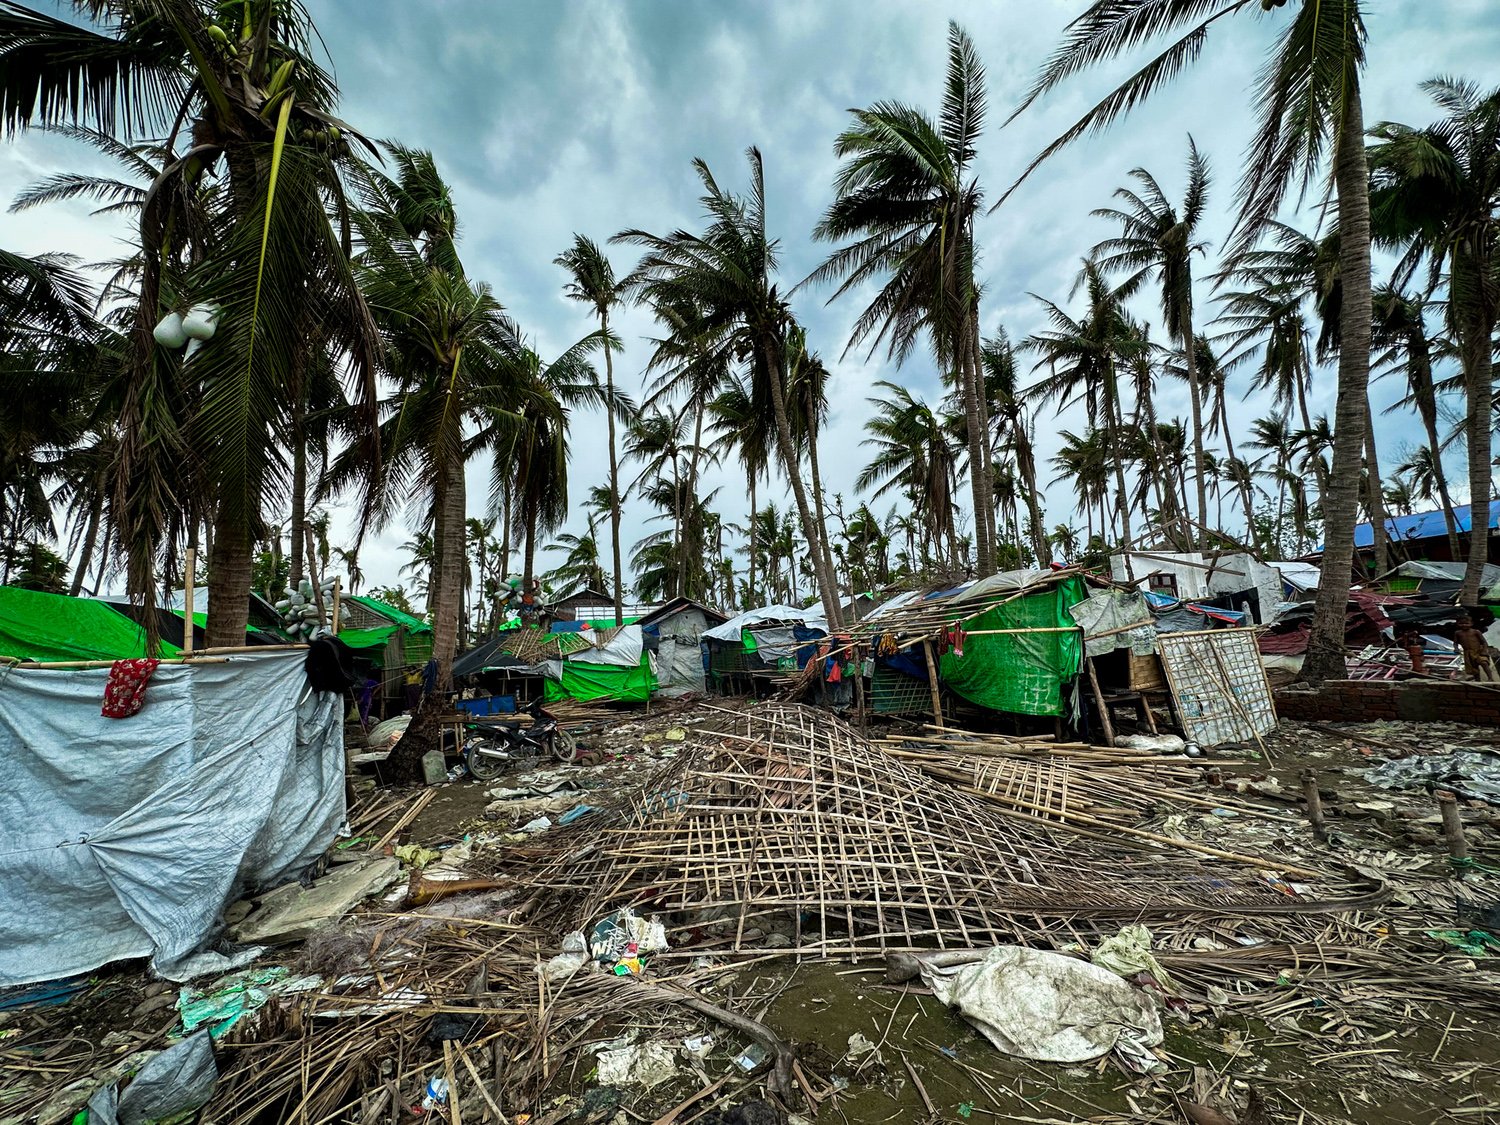 Makeshift shelters covered in tarpaulin dot a landscape littered with debris following a storm.